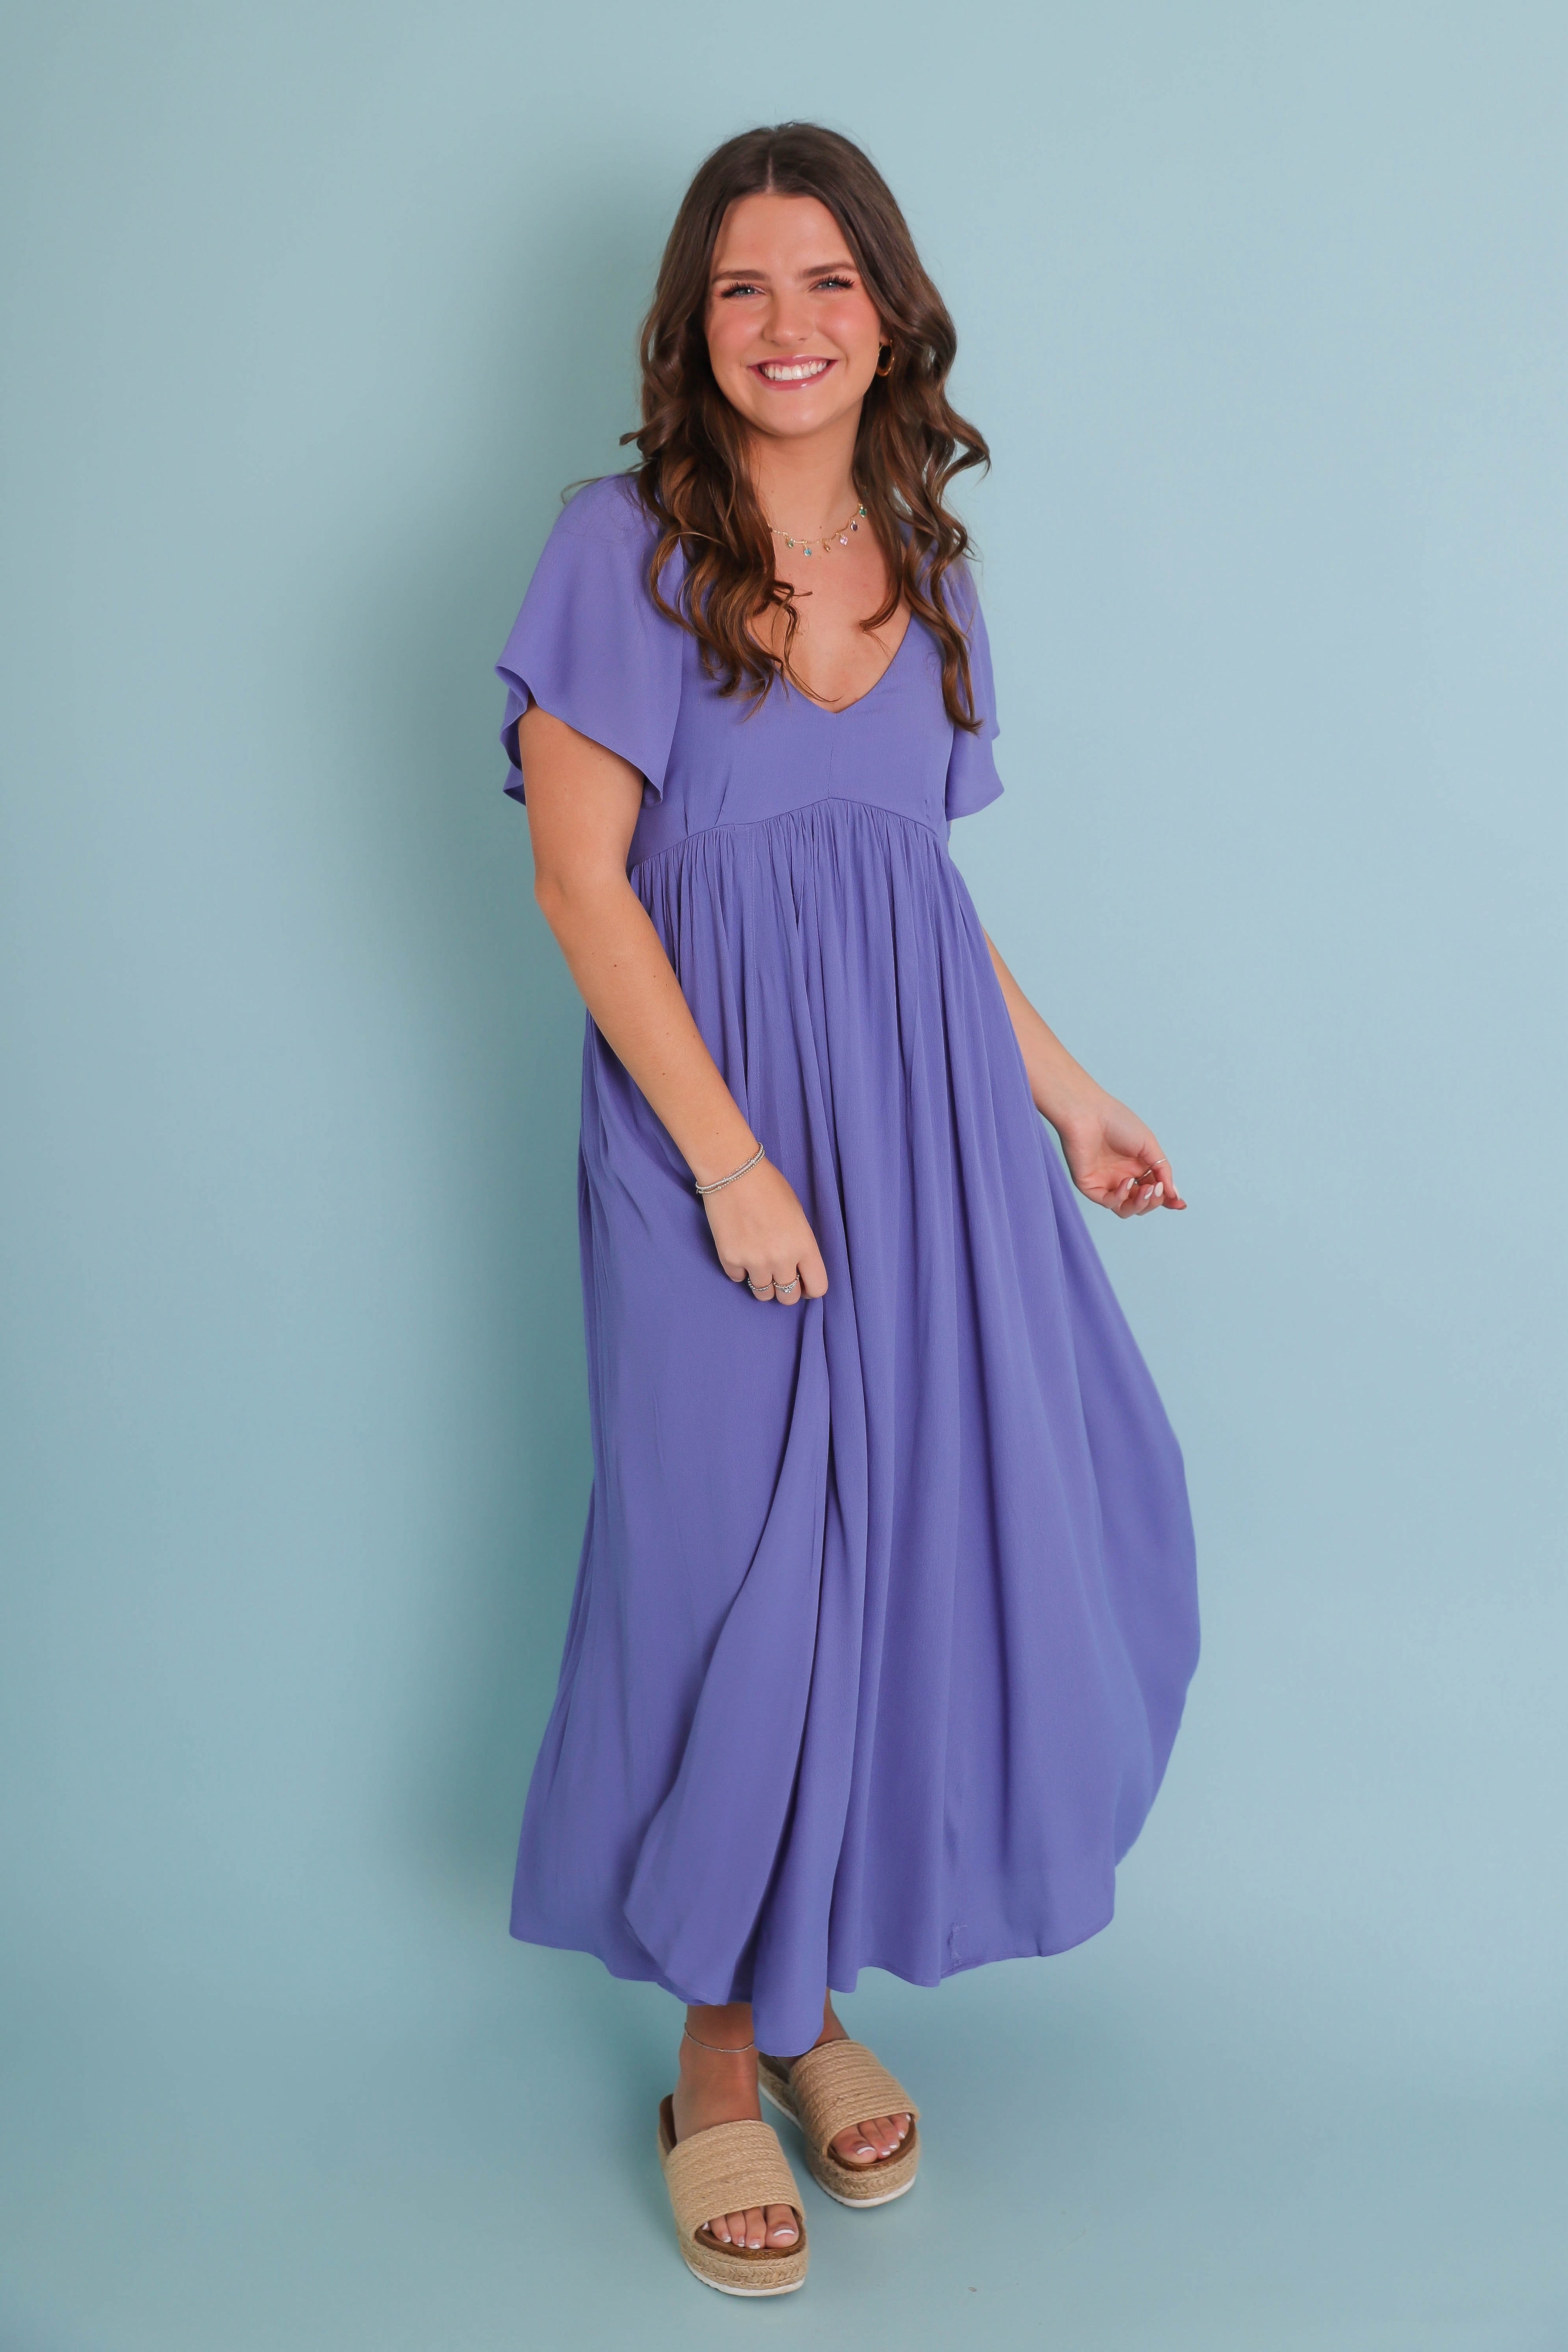 The Simple Things Maxi Dress